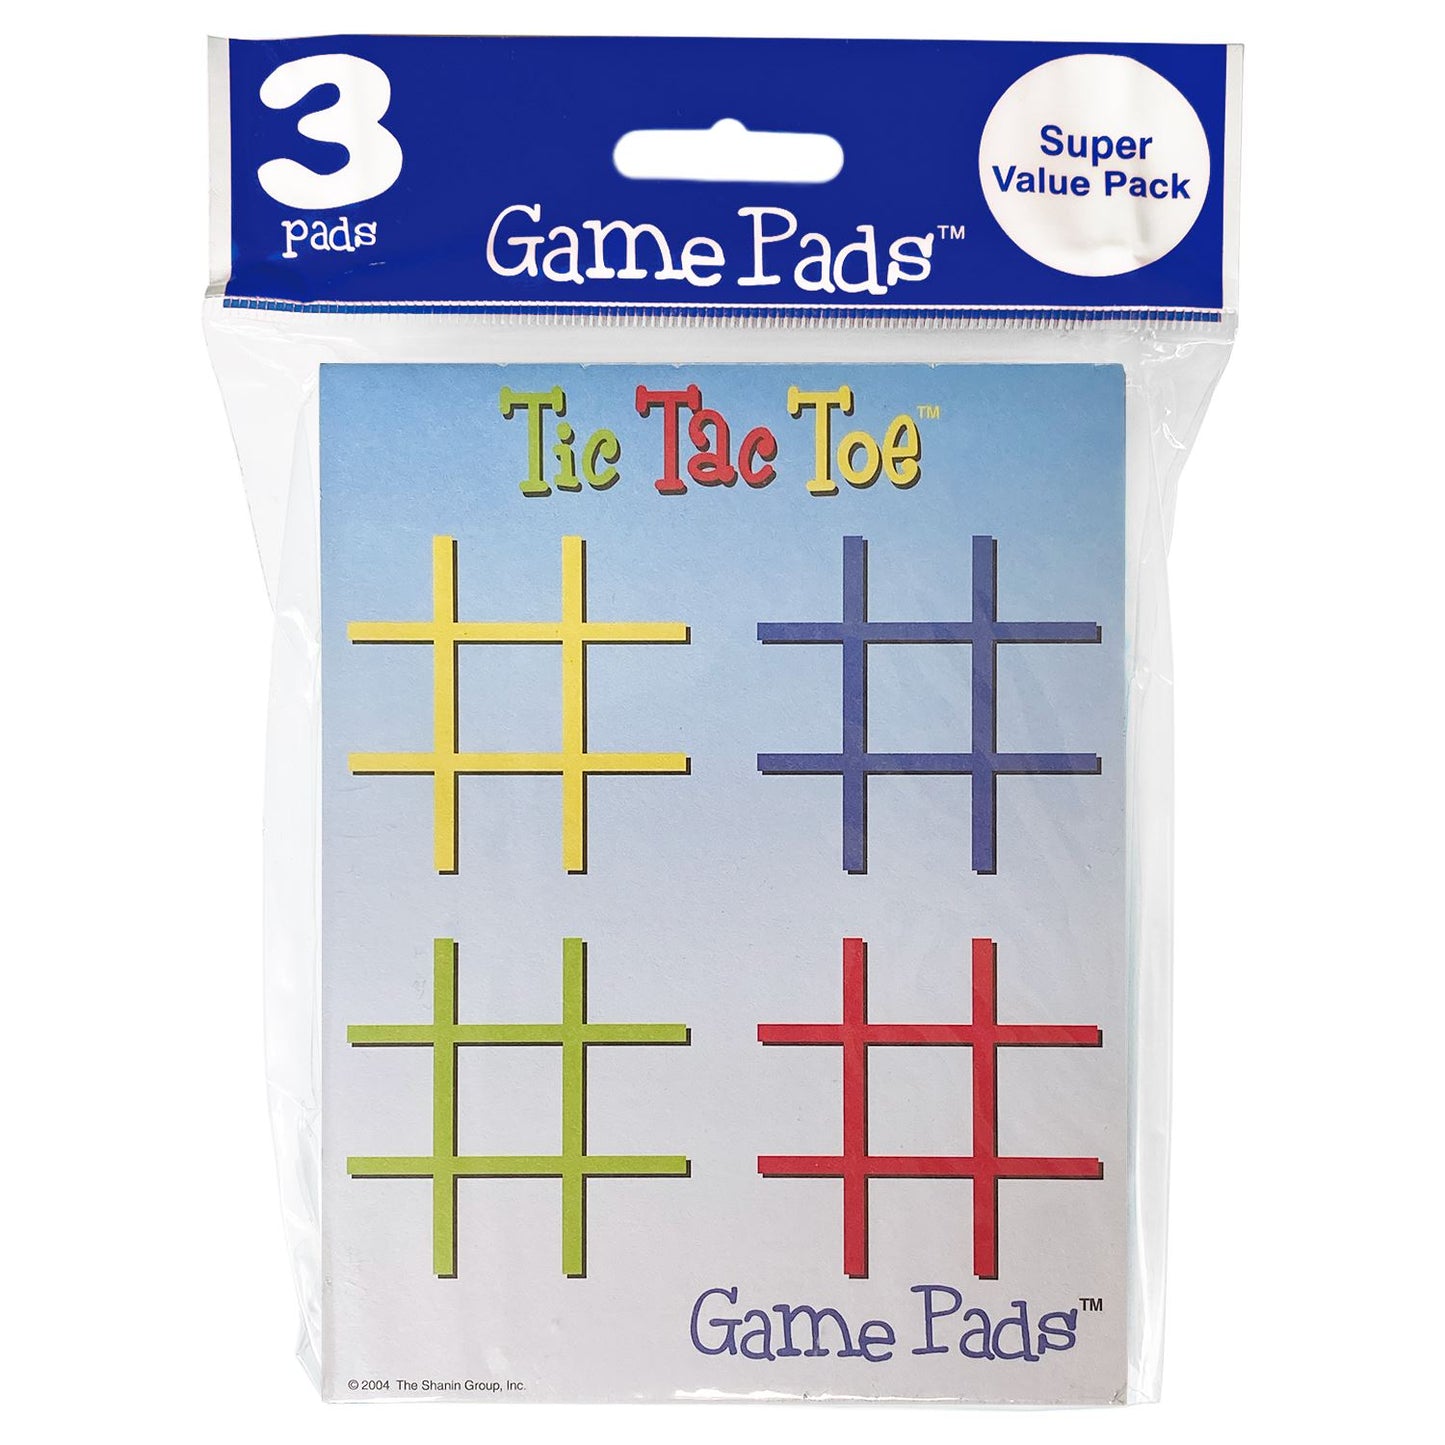 Game Pads TIC TAC TOE™ Game 3 Pads (50 Sheets) Travel Game Kit - Super Value!